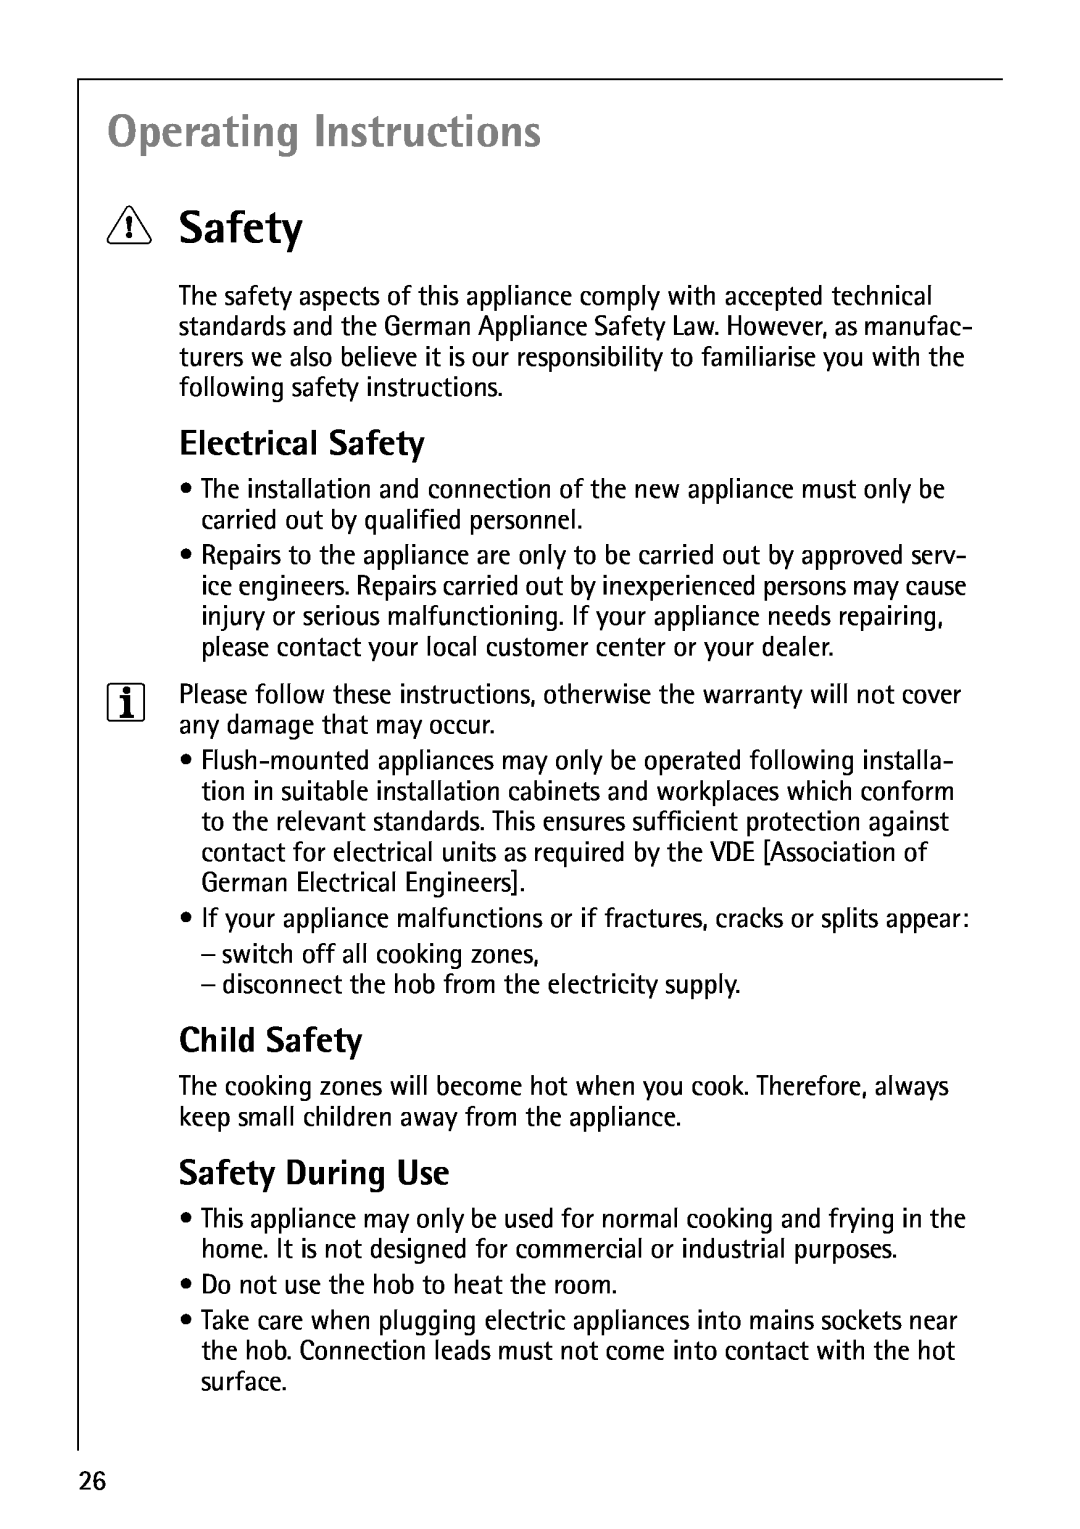 Electrolux 6000K manual Operating Instructions, Electrical Safety, Child Safety, Safety During Use 